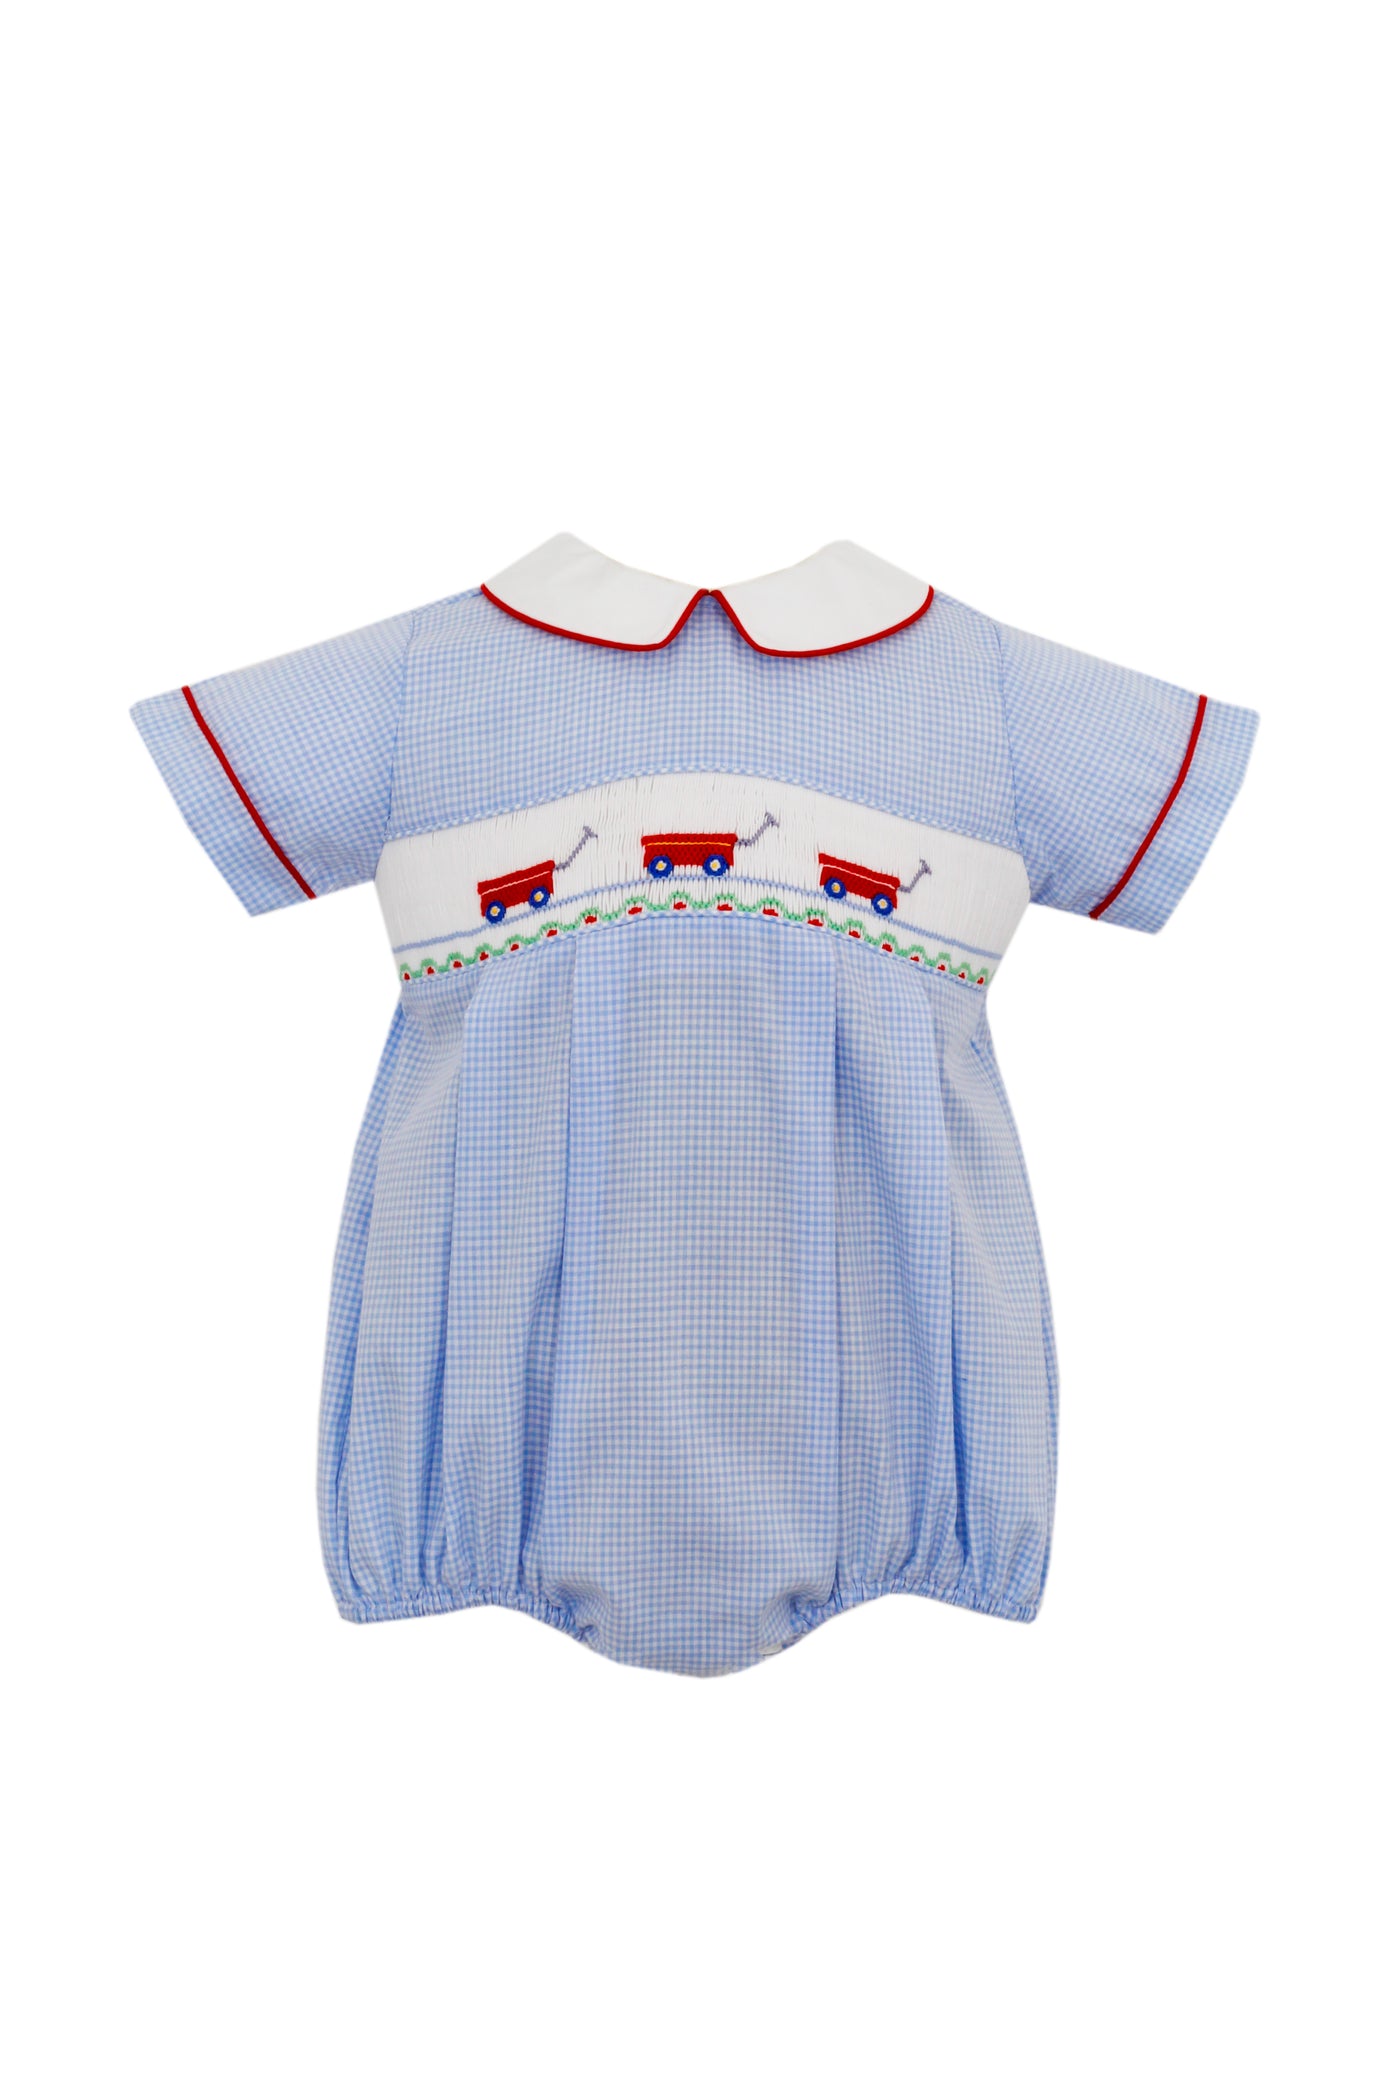 Red Wagon Smocked Bubble - Blue Gingham